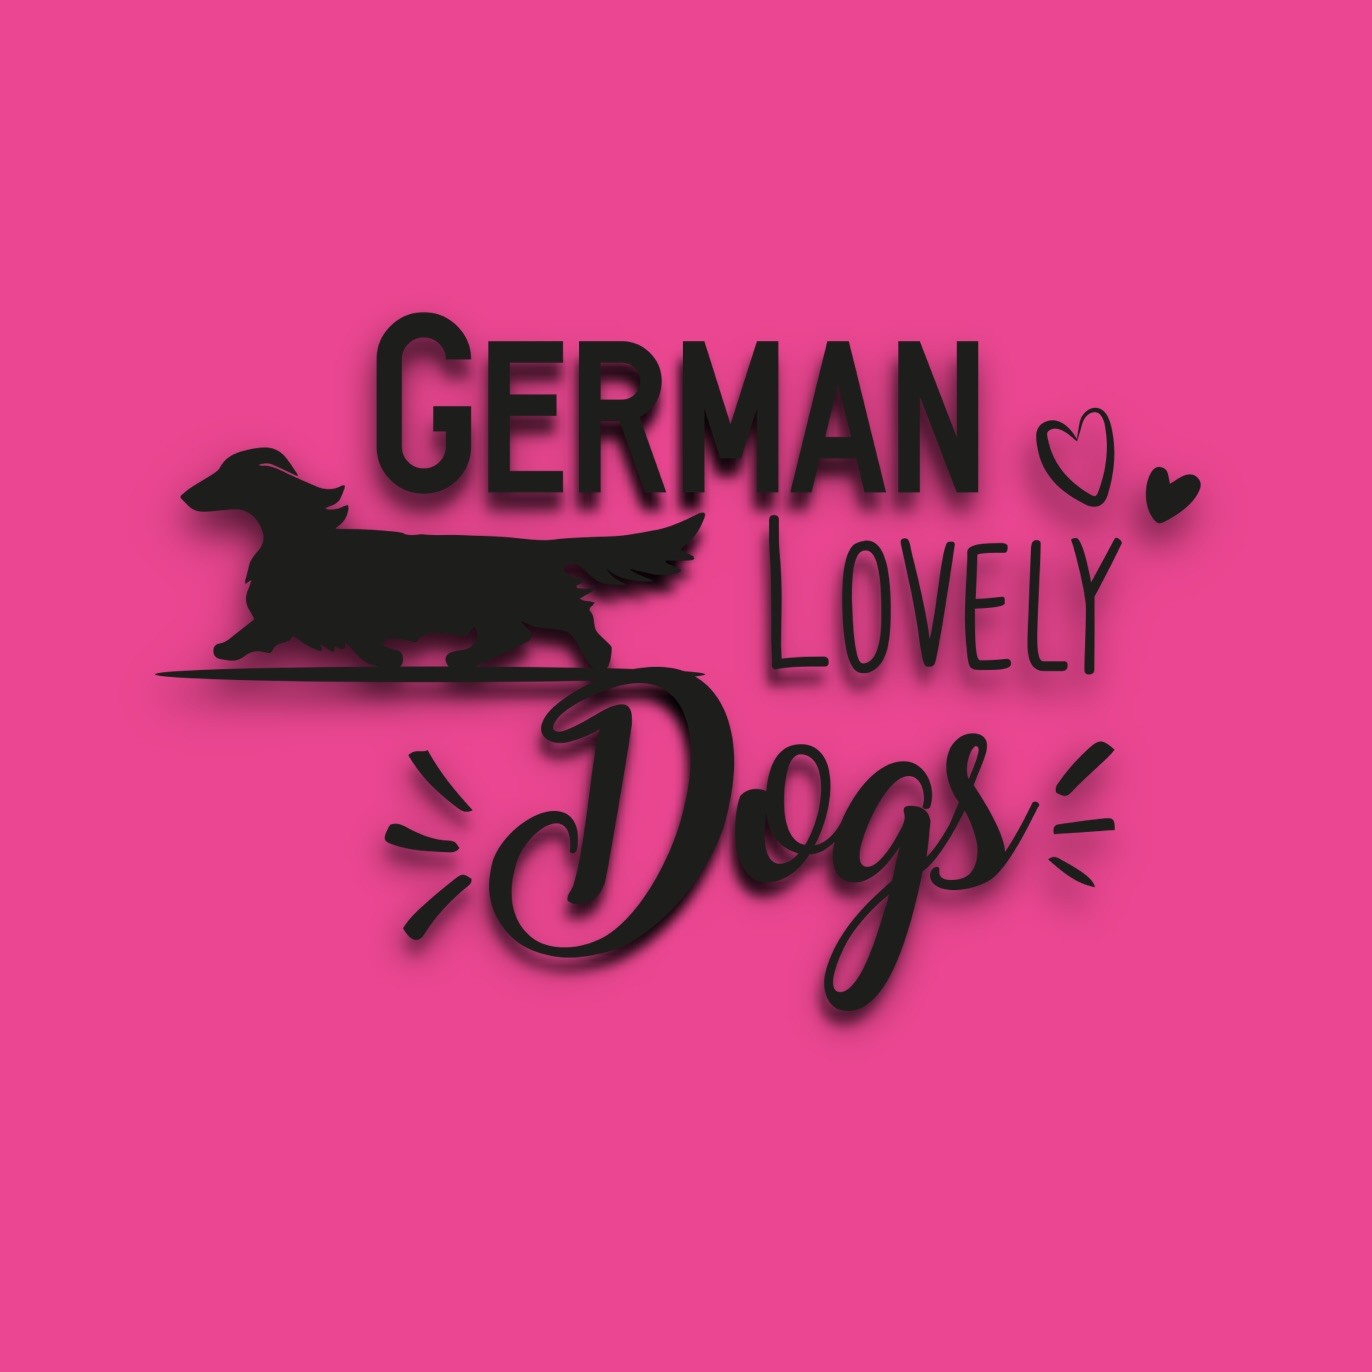 Of German Lovely Dogs